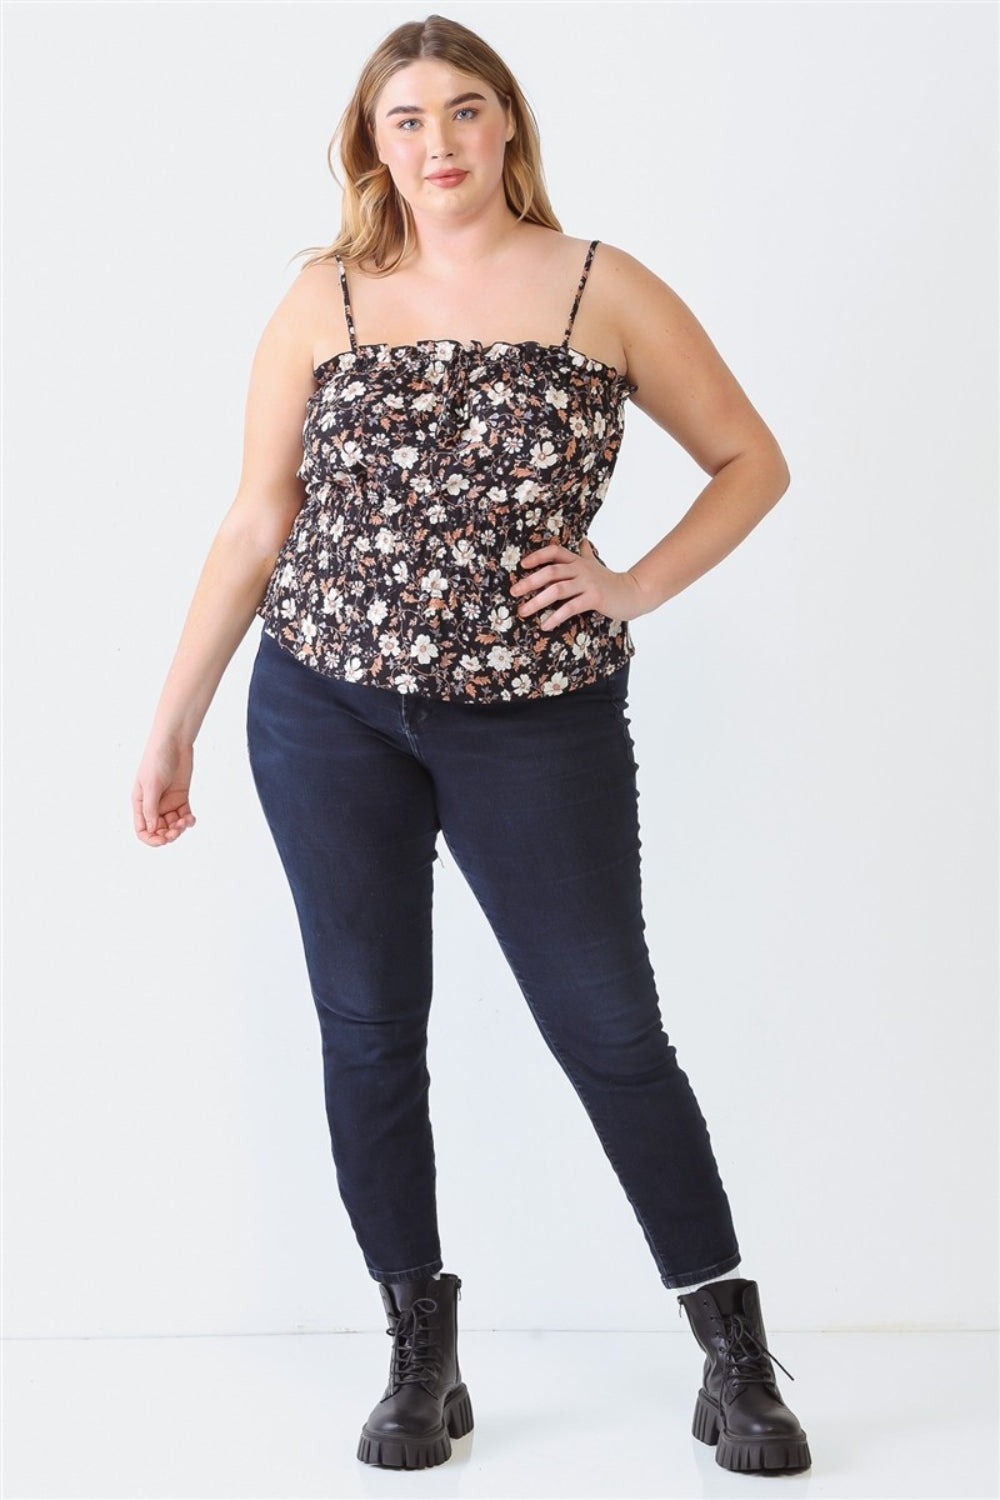 A woman stands against a plain backdrop, wearing a Plus Size Cami | Zenobia Frill Floral Square Neck, dark jeans, and black boots.